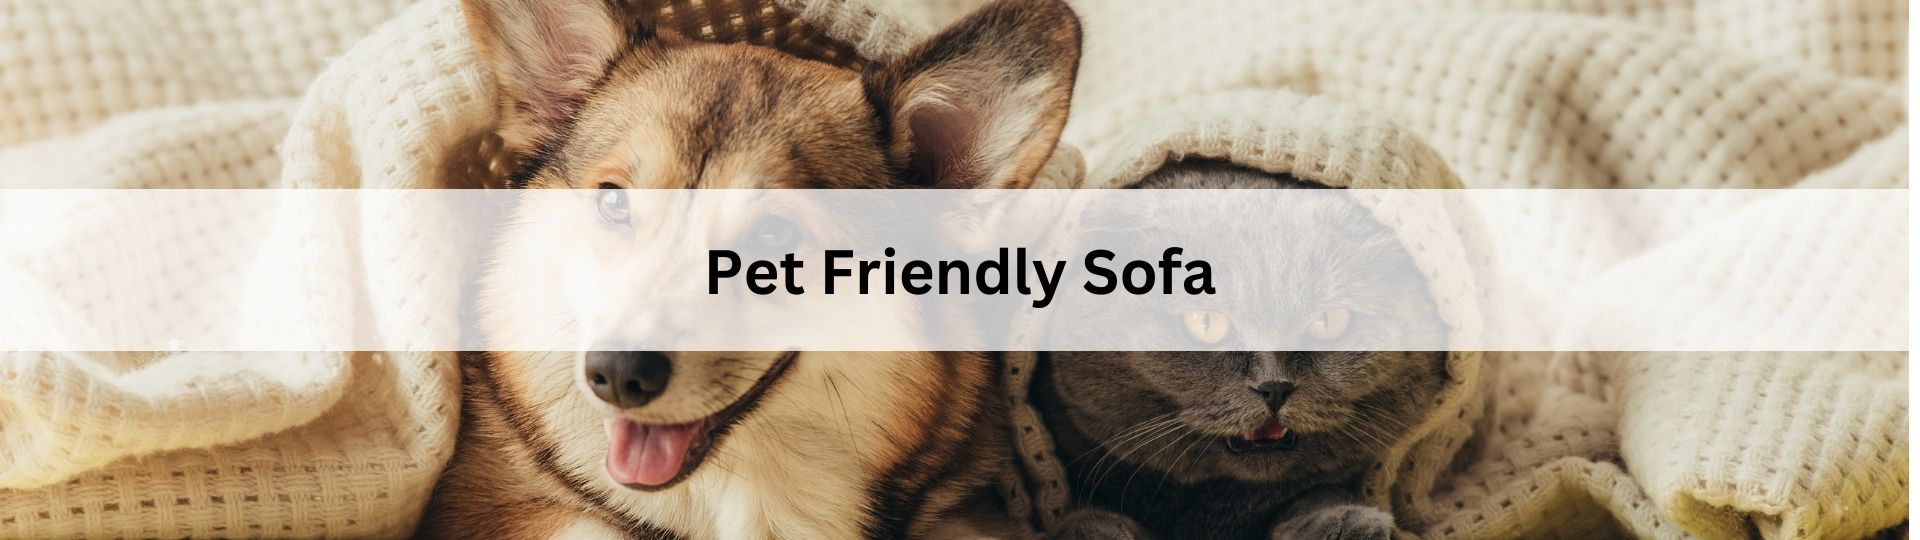 PET FRIENDLY SOFA COLLECTION